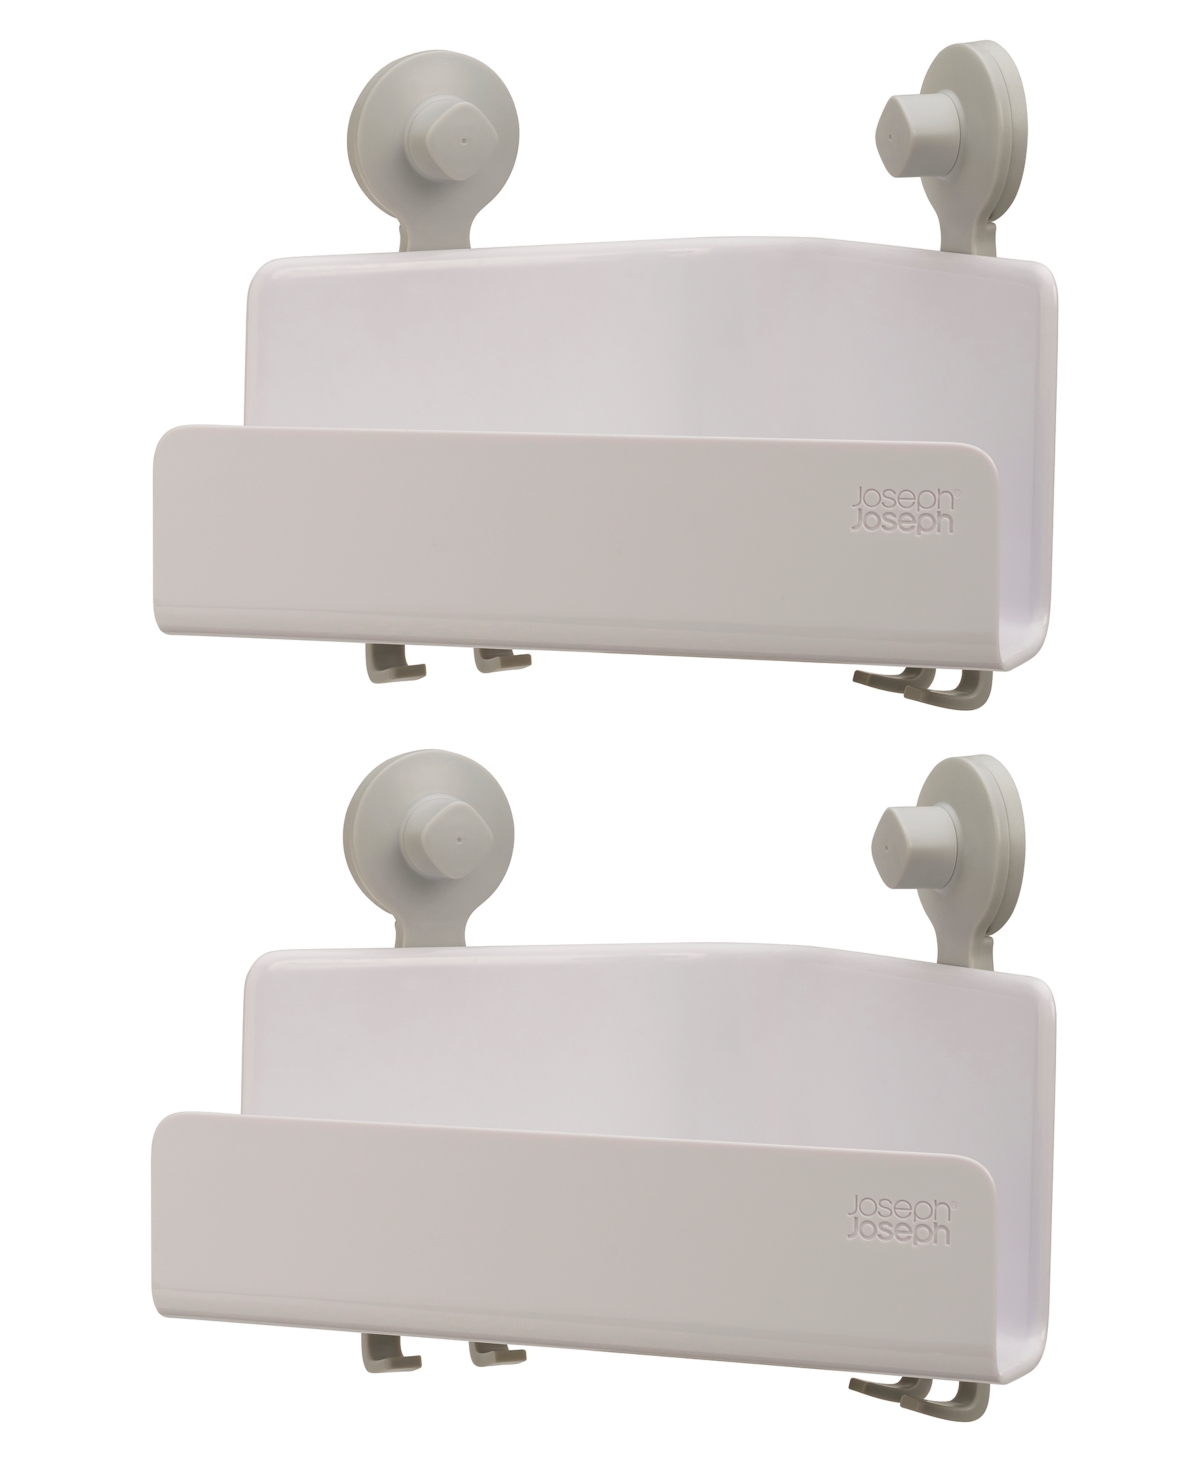 EasyStore Corner Shower Caddy, Set of 2 - White